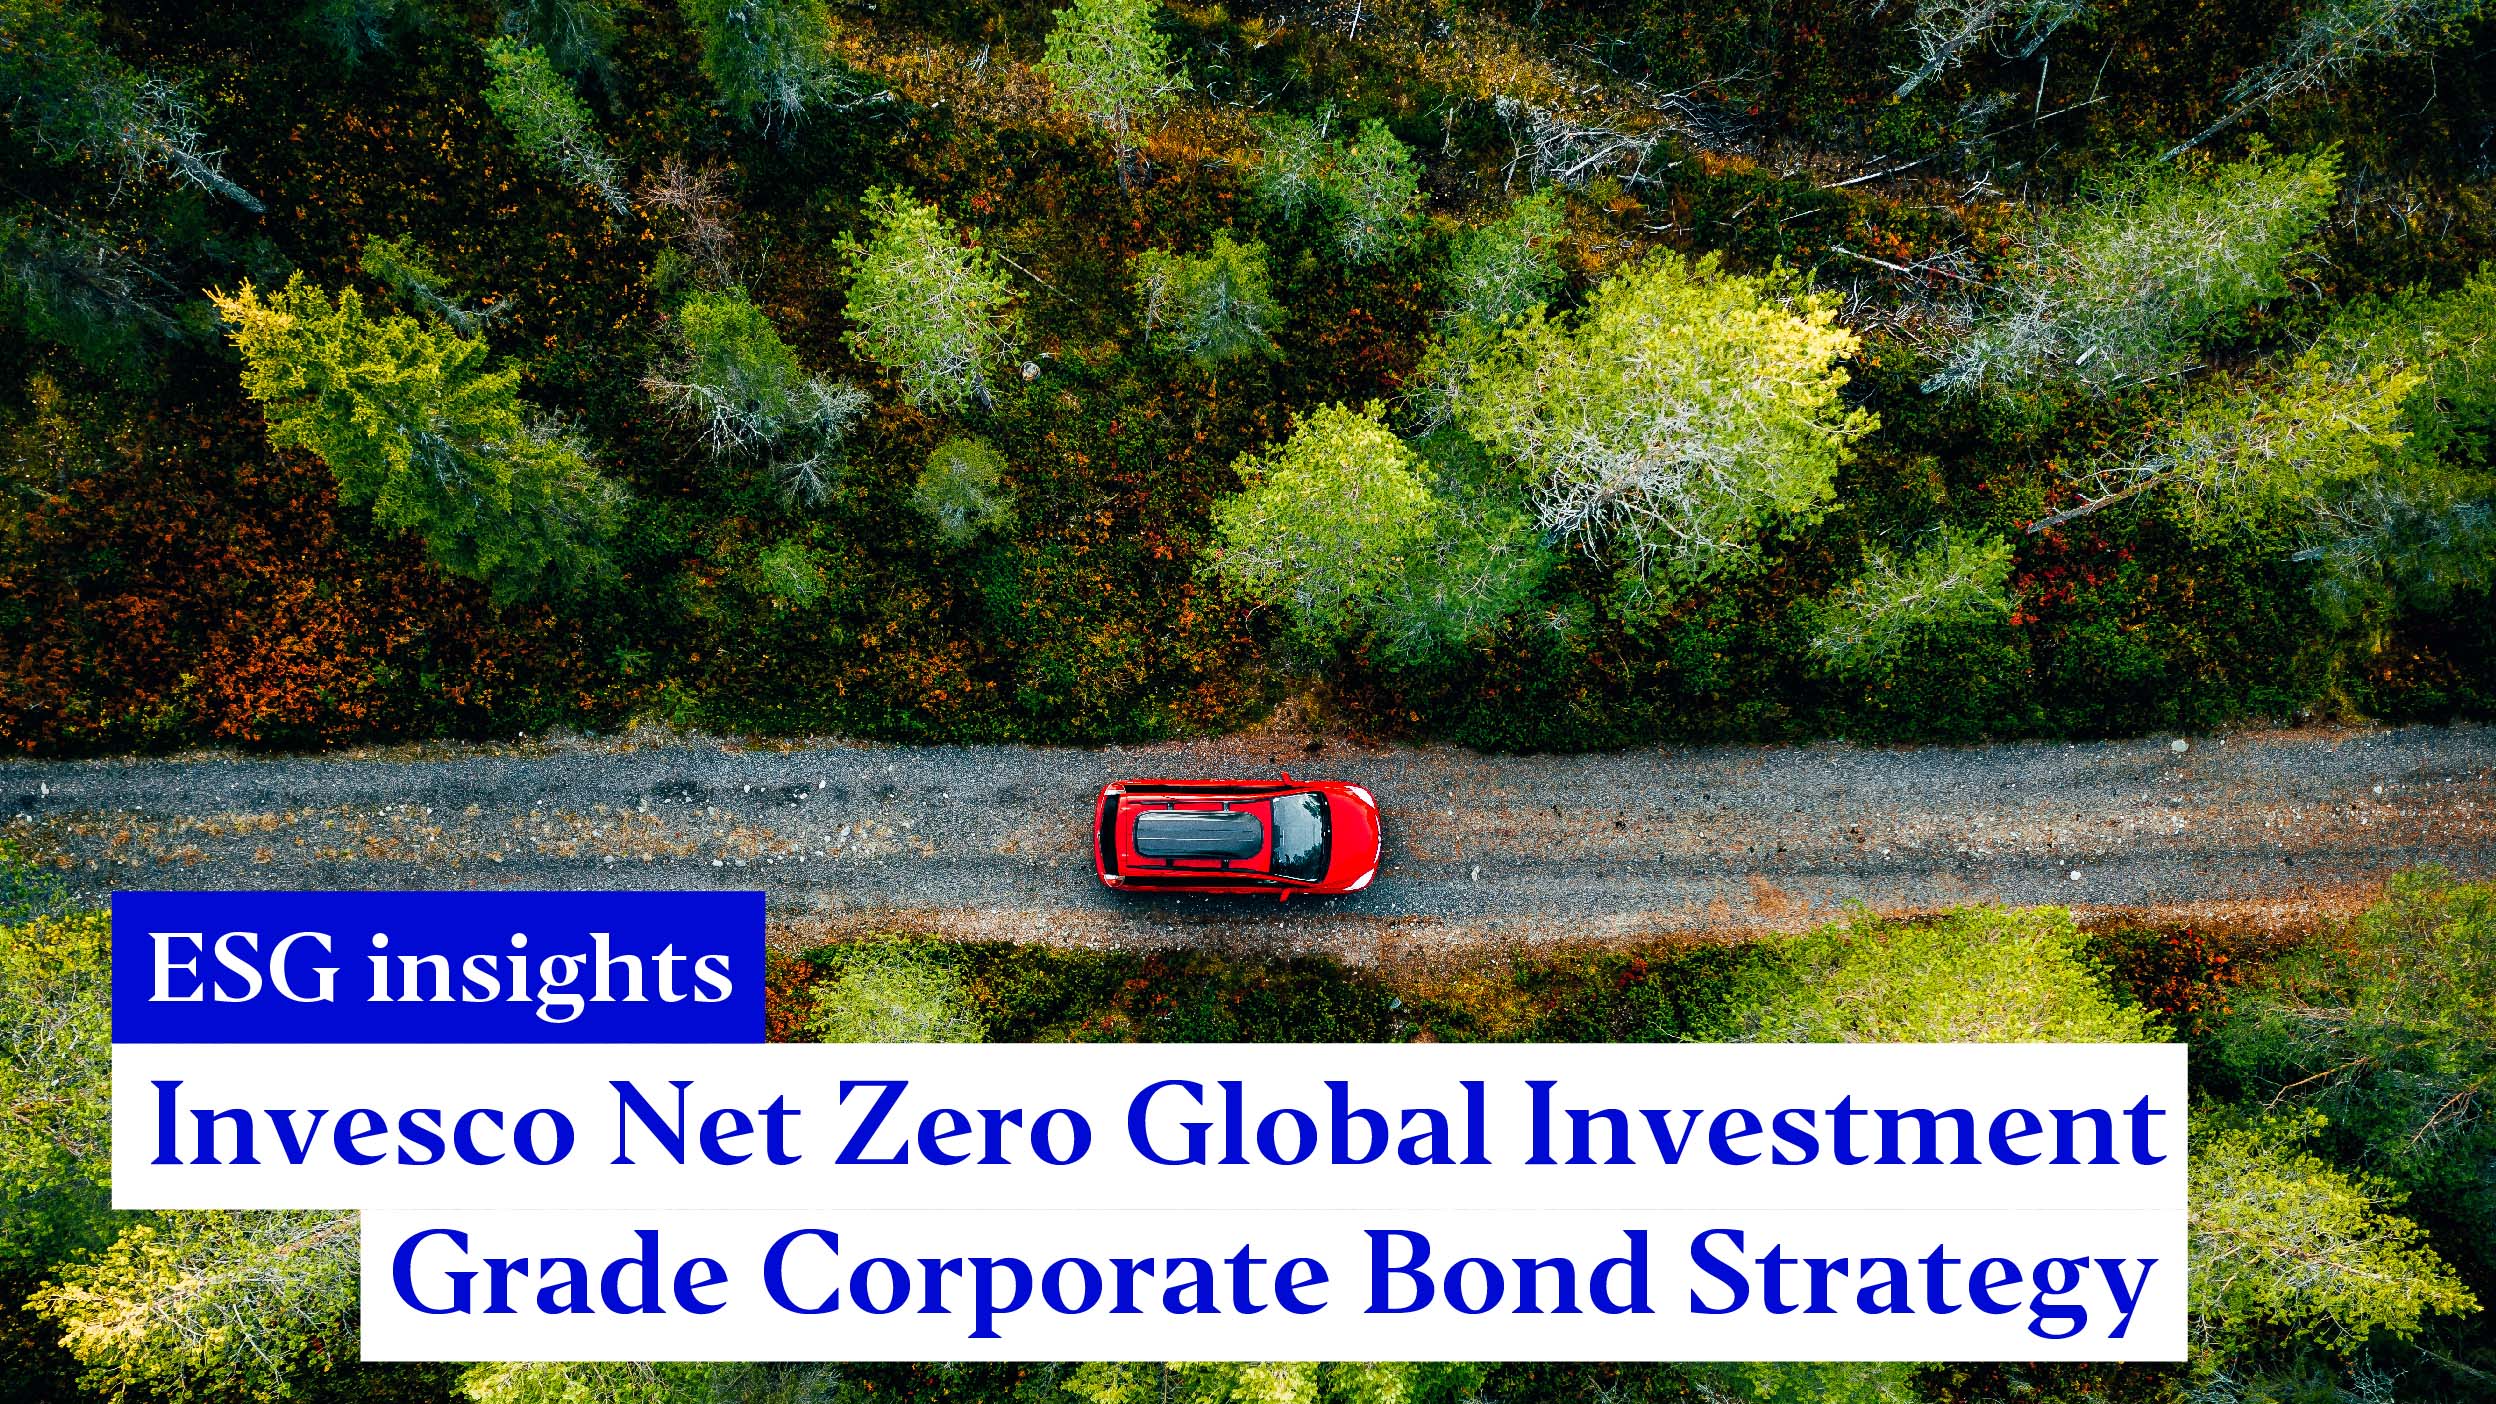 Supporting companies committed to the net zero journey